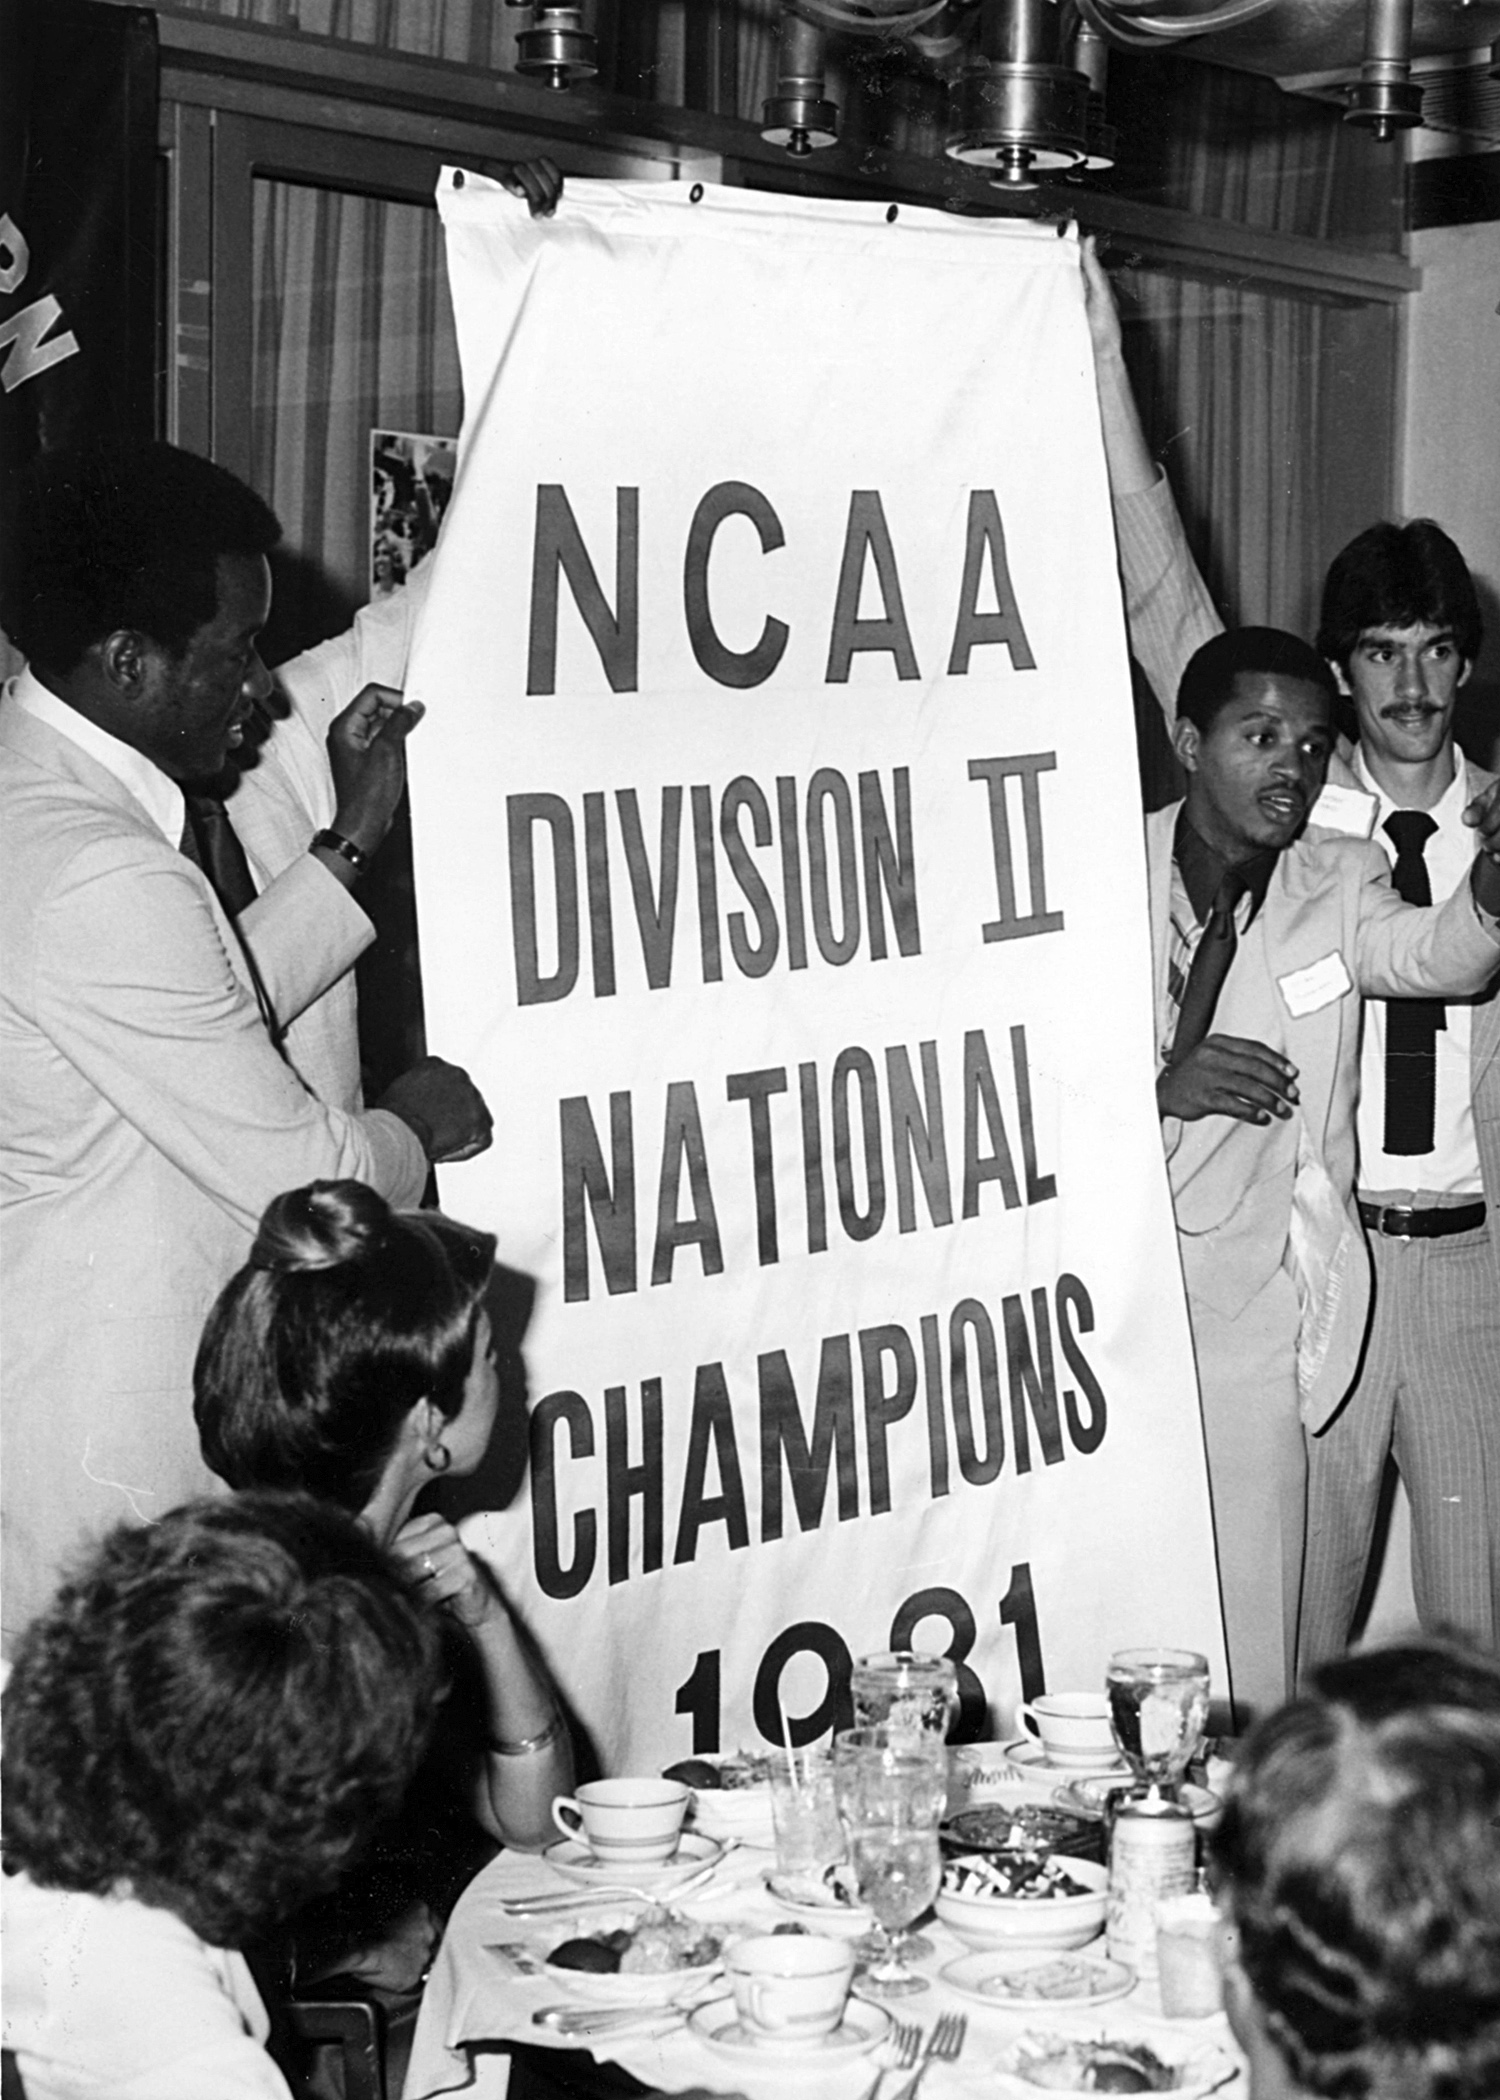 Men's Basketball team with NCAA Division II National Champions 1981 Banner